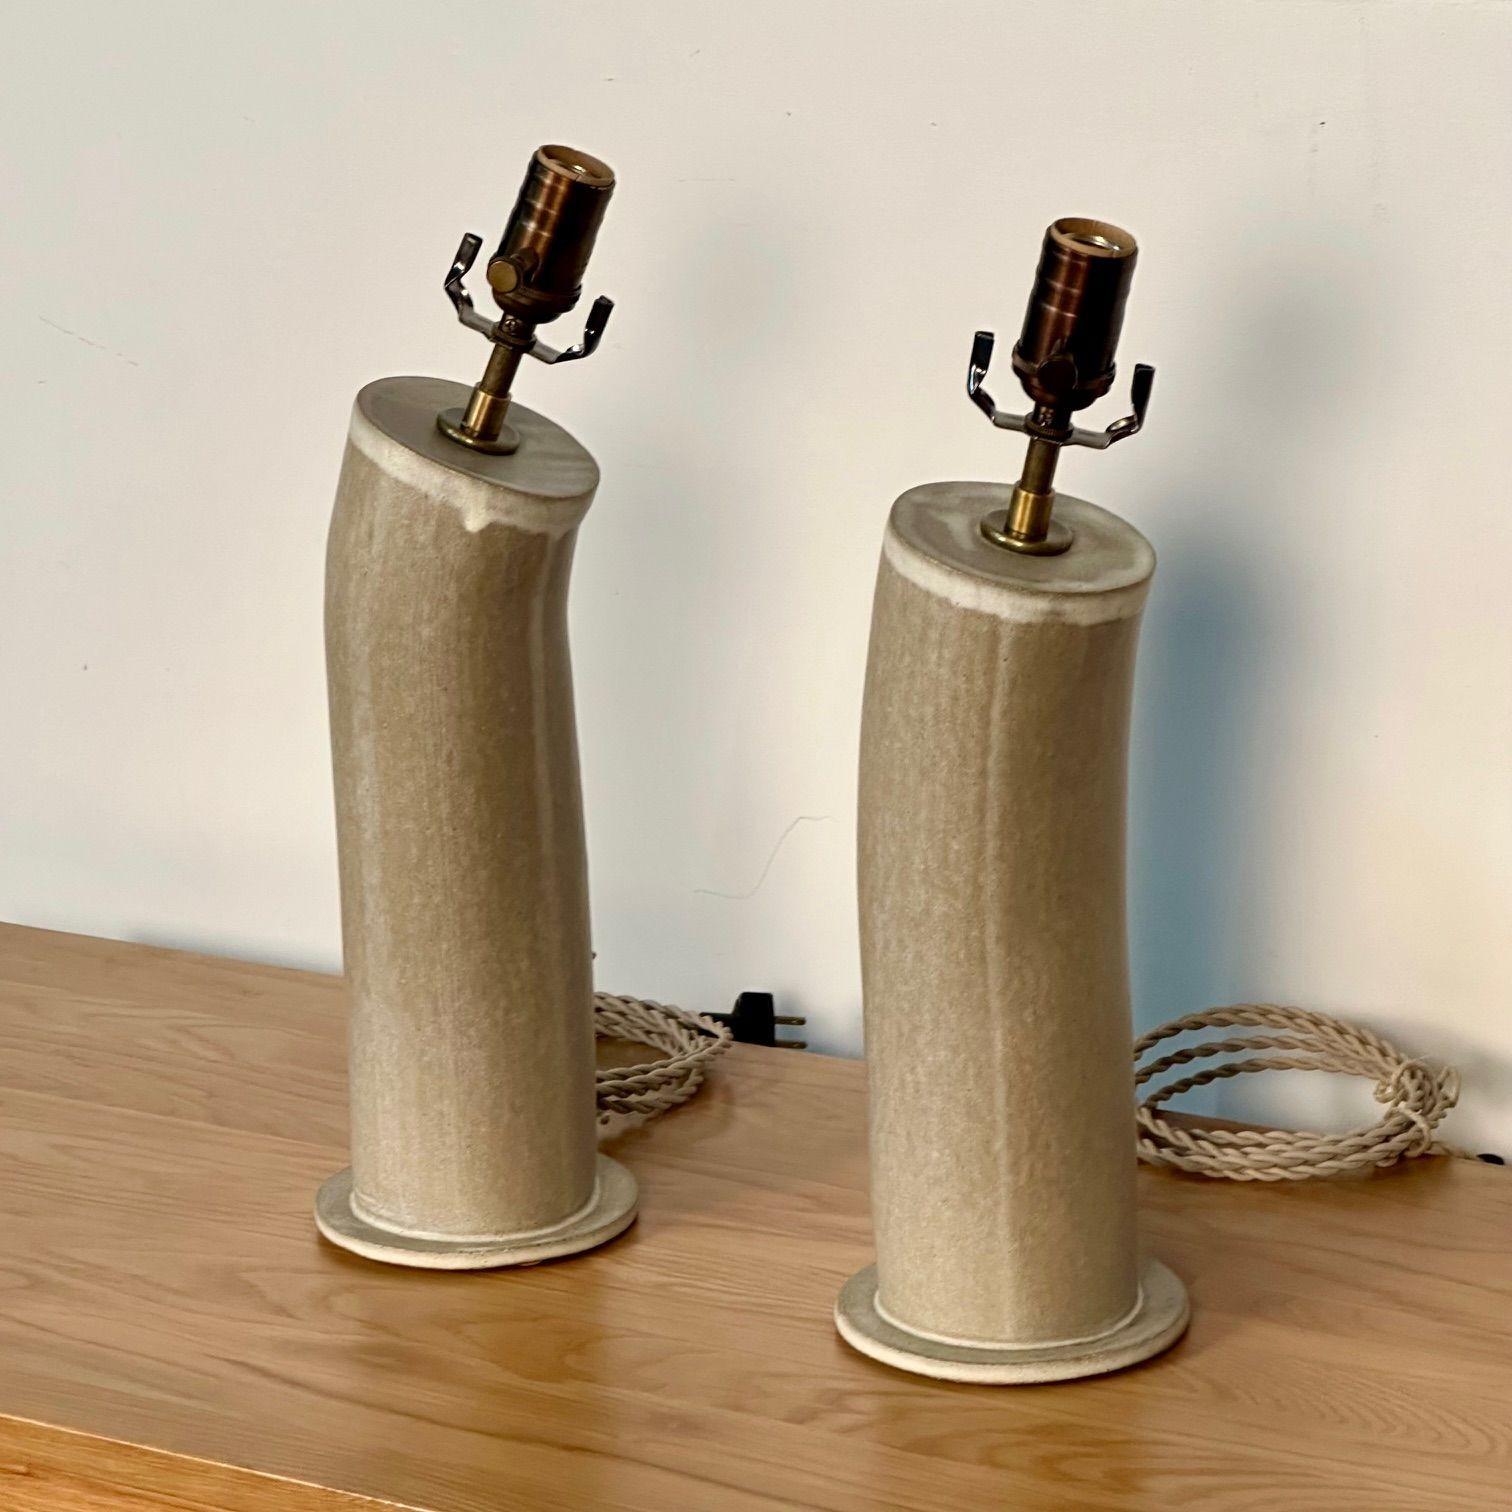 Dumais Made, Contemporary, Ceramic Table Lamps, Beige Parchment Glaze, 2021 In New Condition For Sale In Stamford, CT